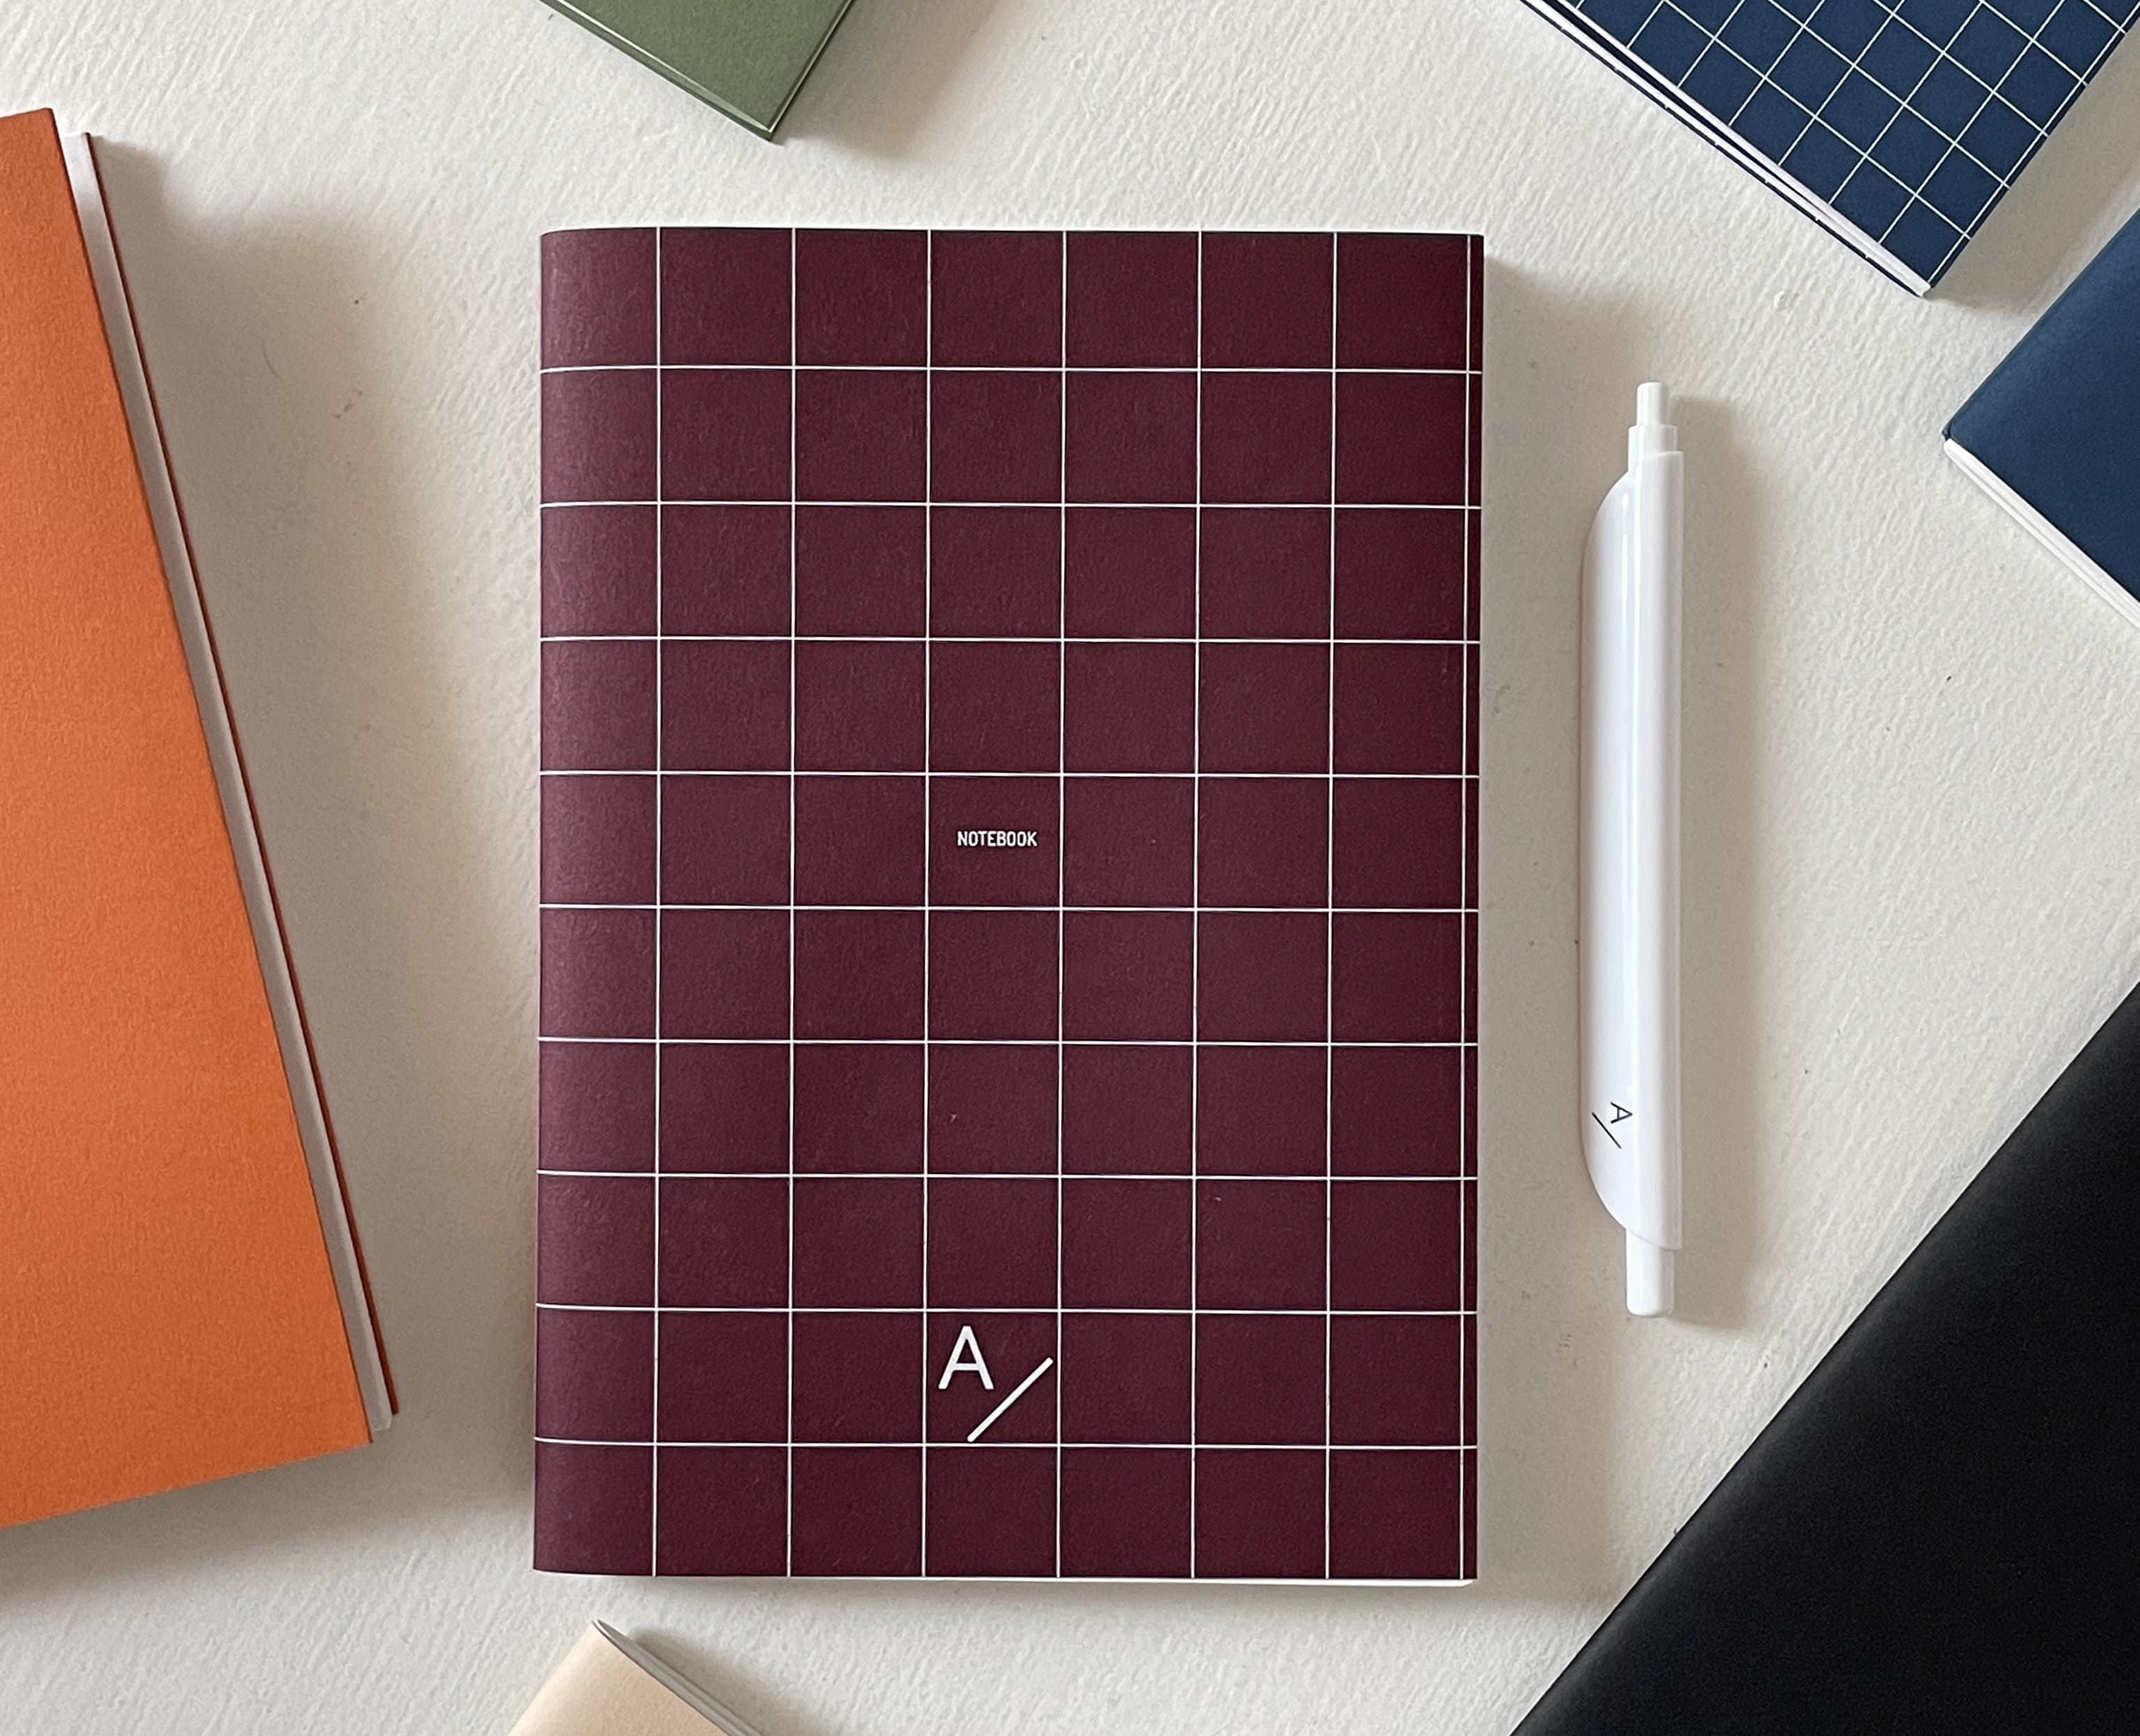 notebooks with the logo of Anomali on them